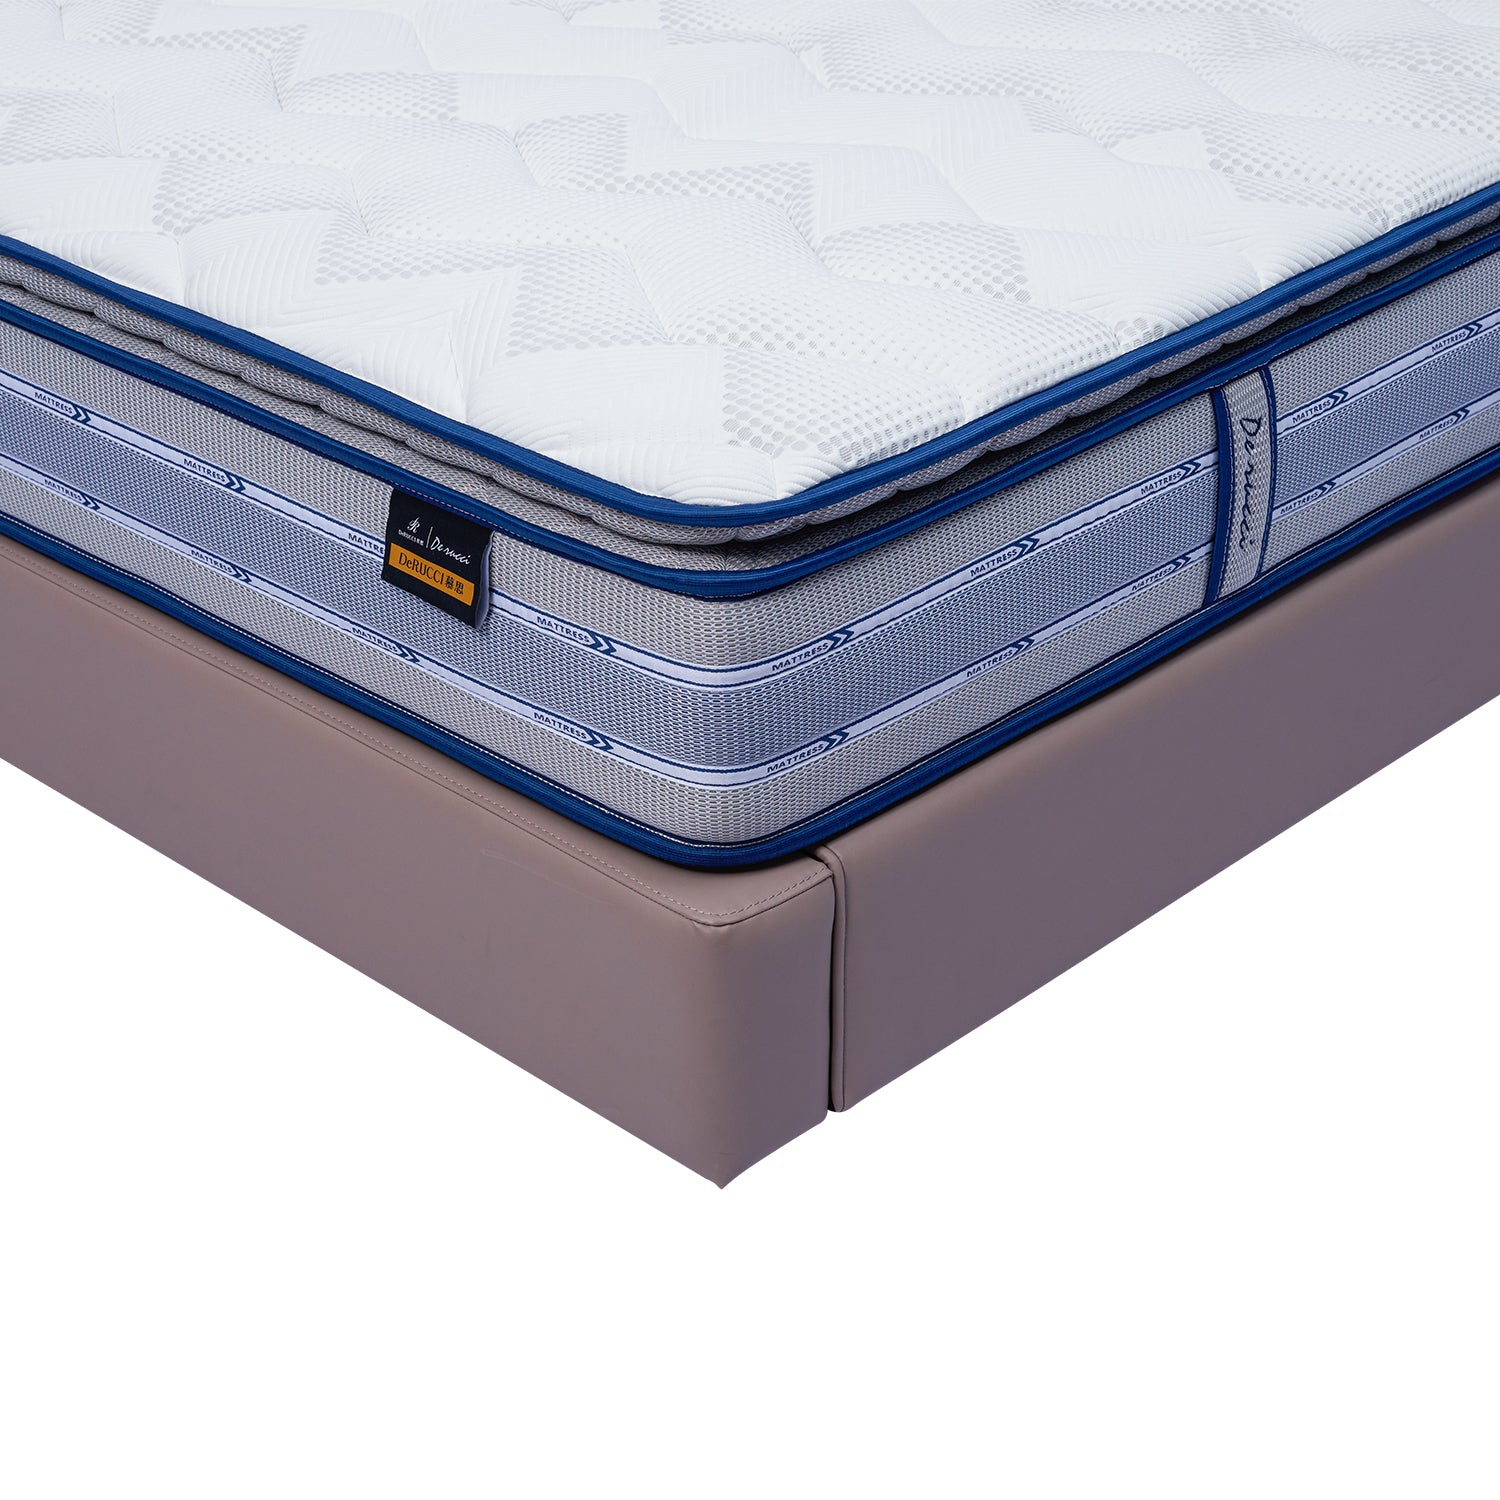 Close-up of DeRUCCI bed frame BOC1 - 018 with white quilted fabric mattress and blue striped side panel